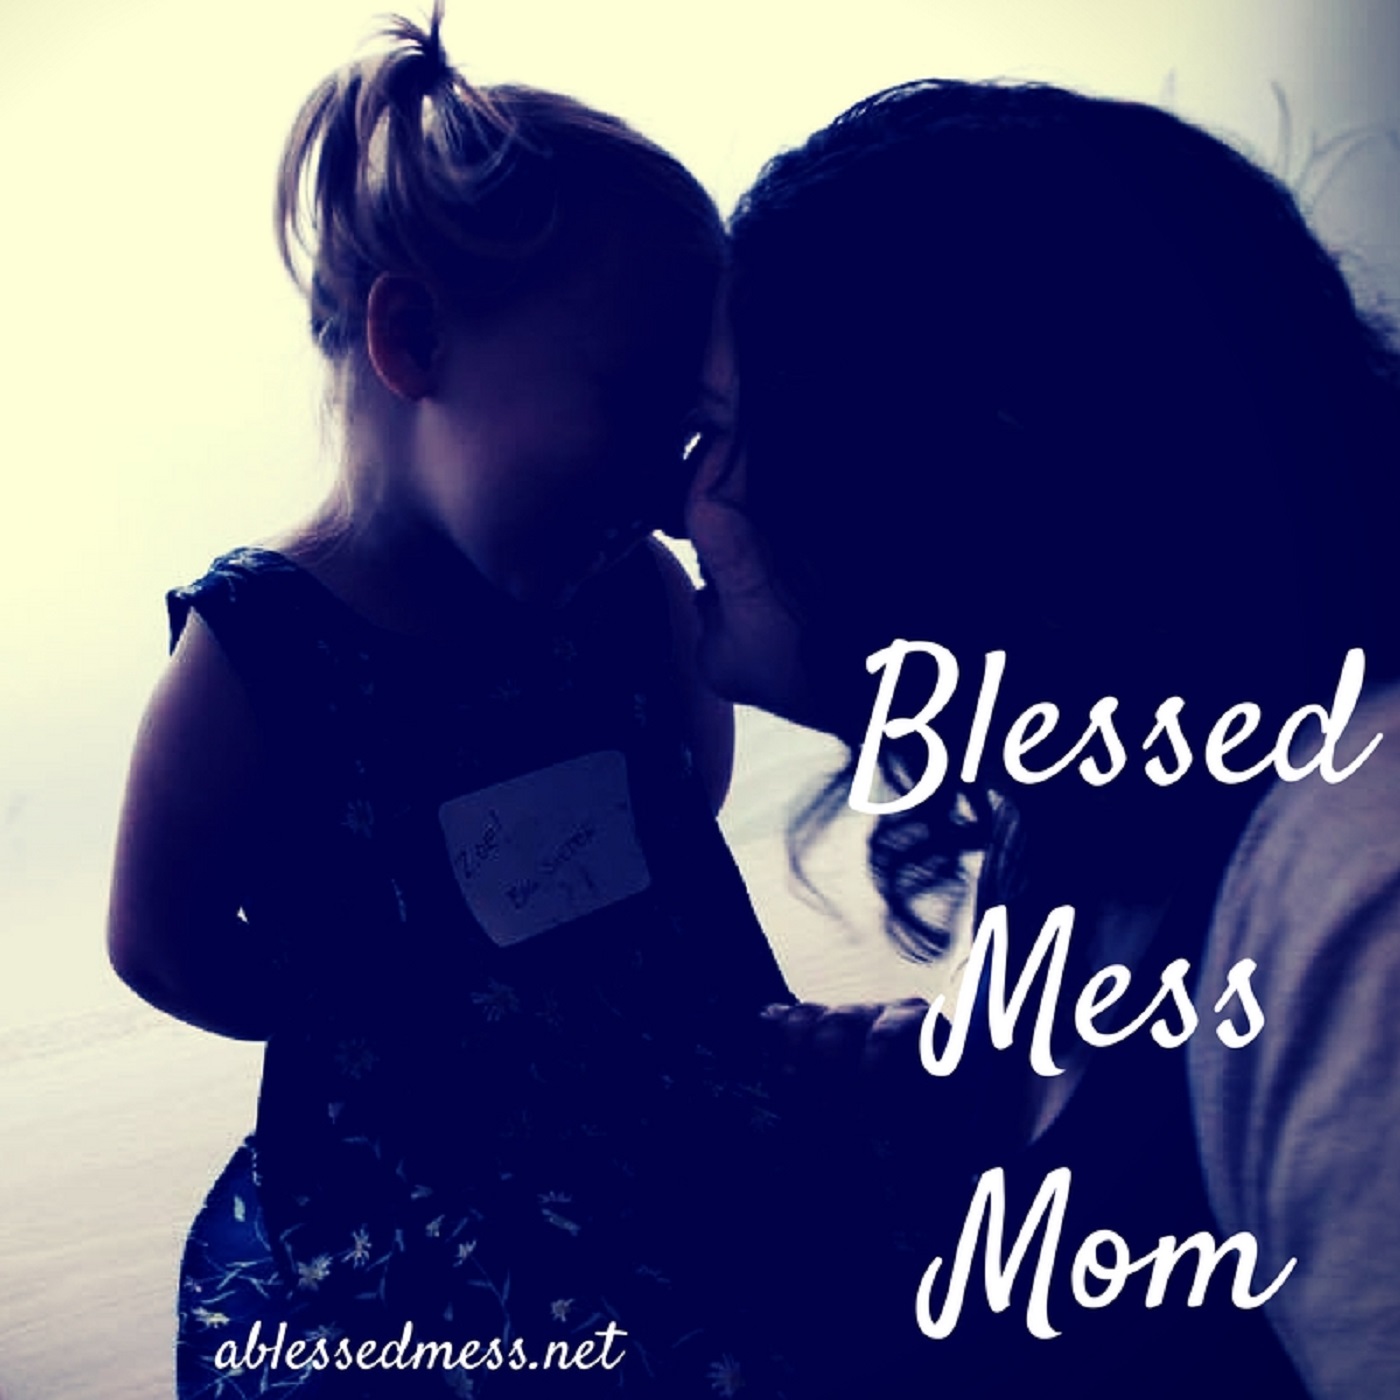 Blessed Mess Mom 4-16-18 Babies R Us Update, Taco Balloon and Goat Boy